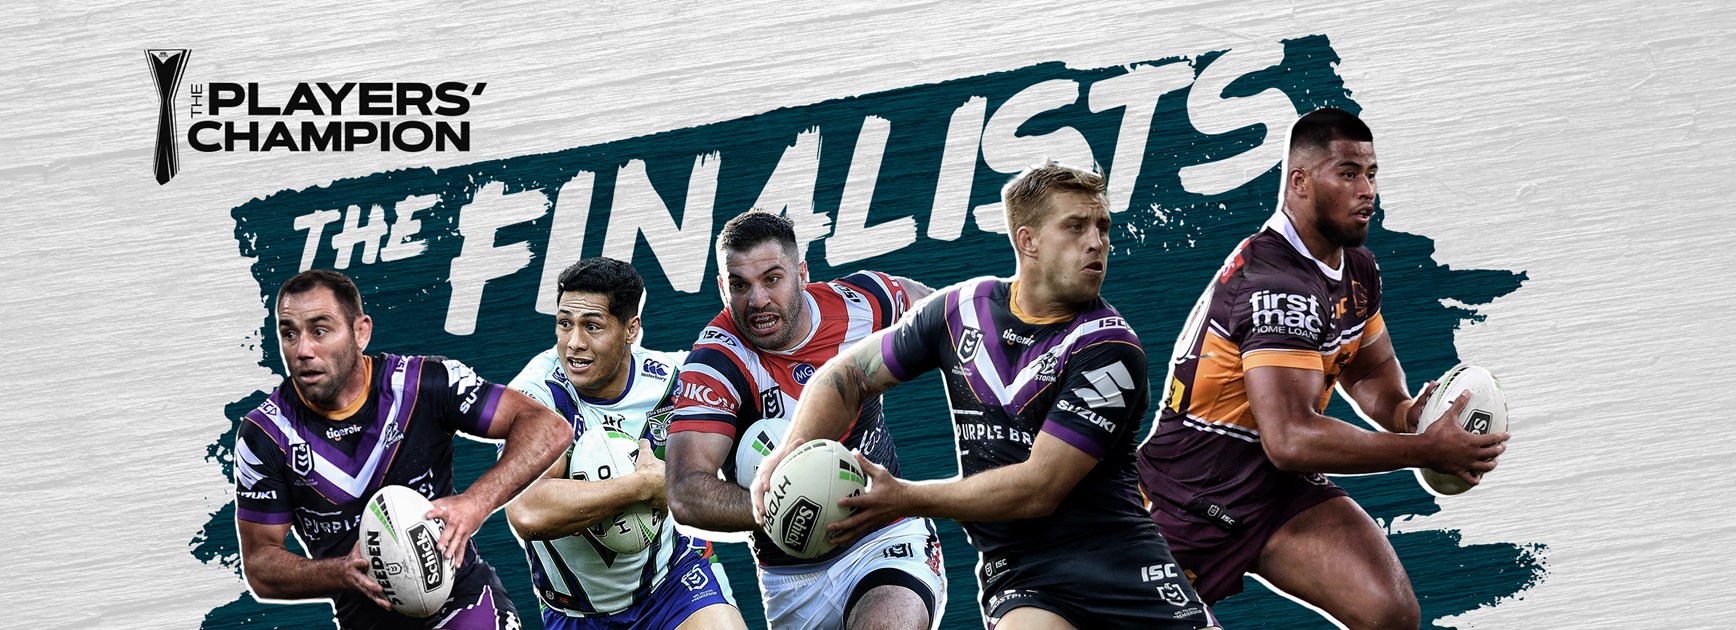 Smith, Tedesco, RTS, Haas, Munster finalists for RLPA Players' Champion